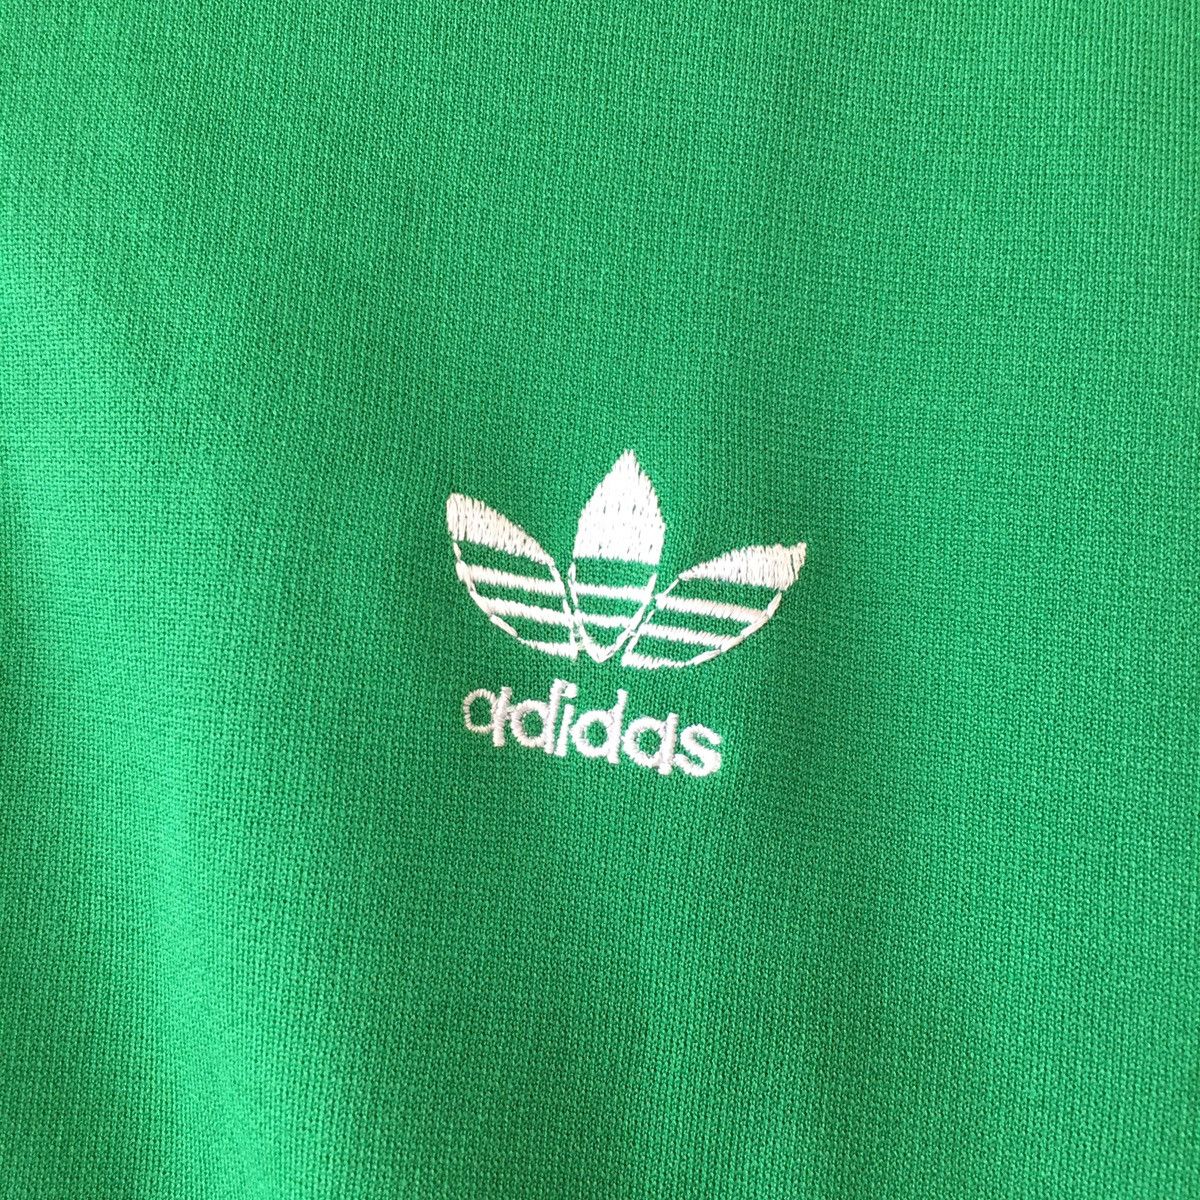 Adidas vintage 90s adidas track top Size US L / EU 52-54 / 3 - 2 Preview